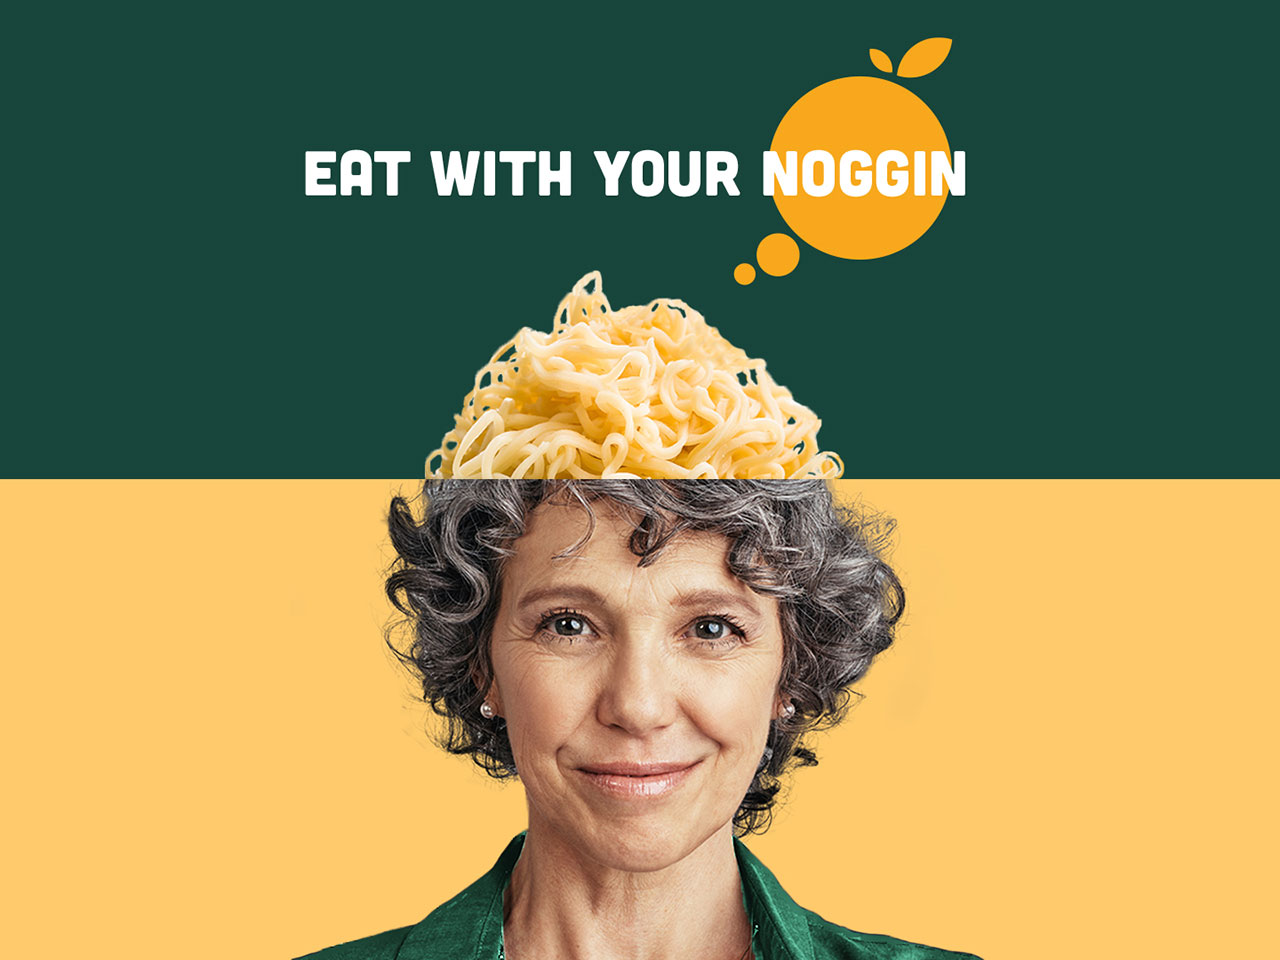 "Eat with your noggin"